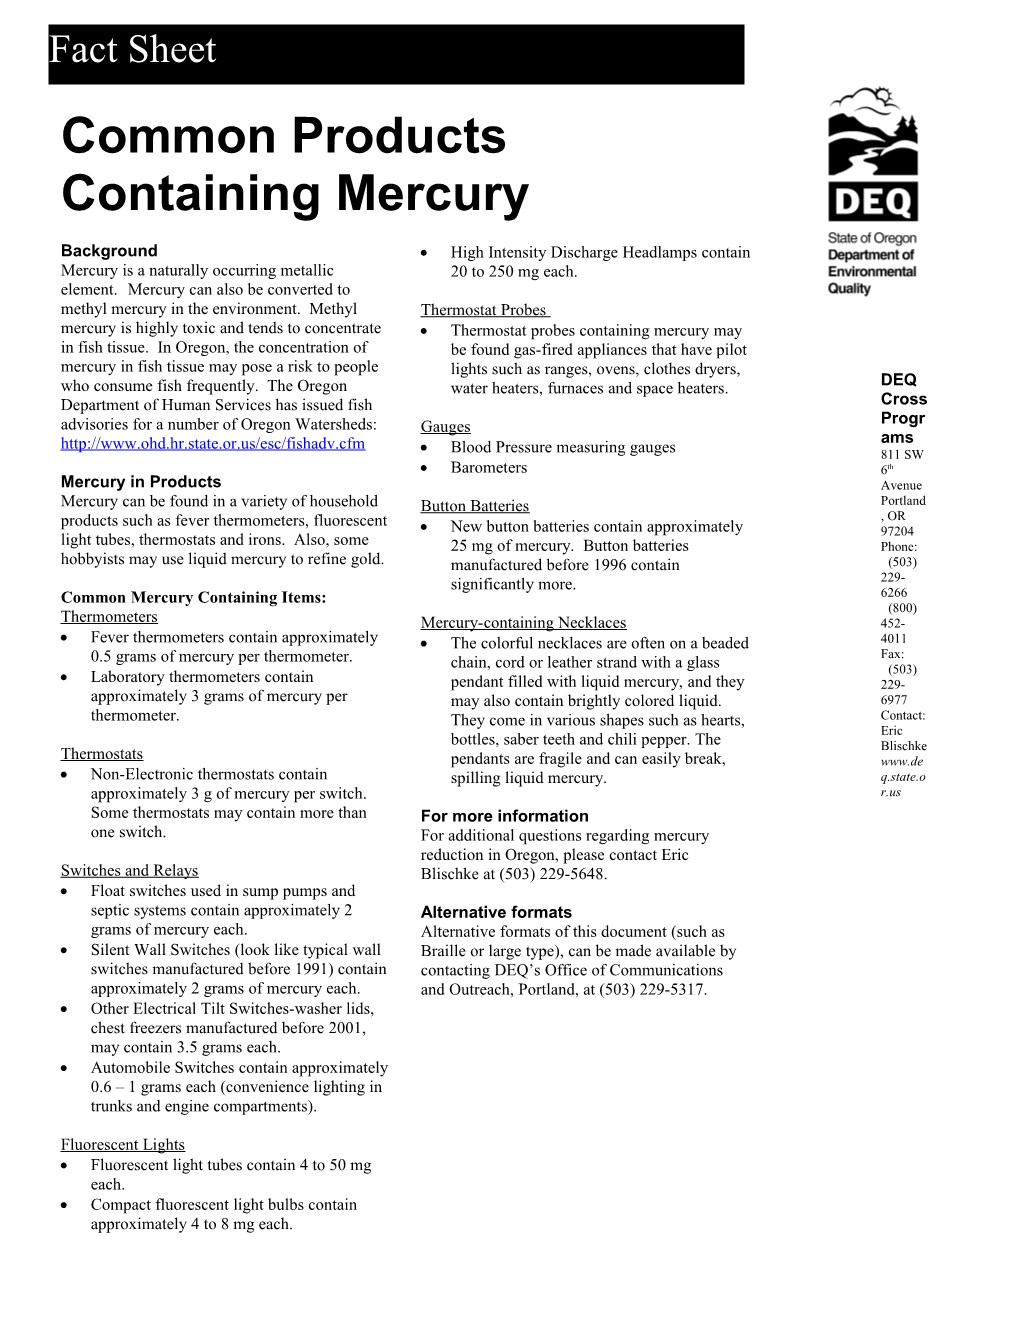 Common Products Containing Mercury